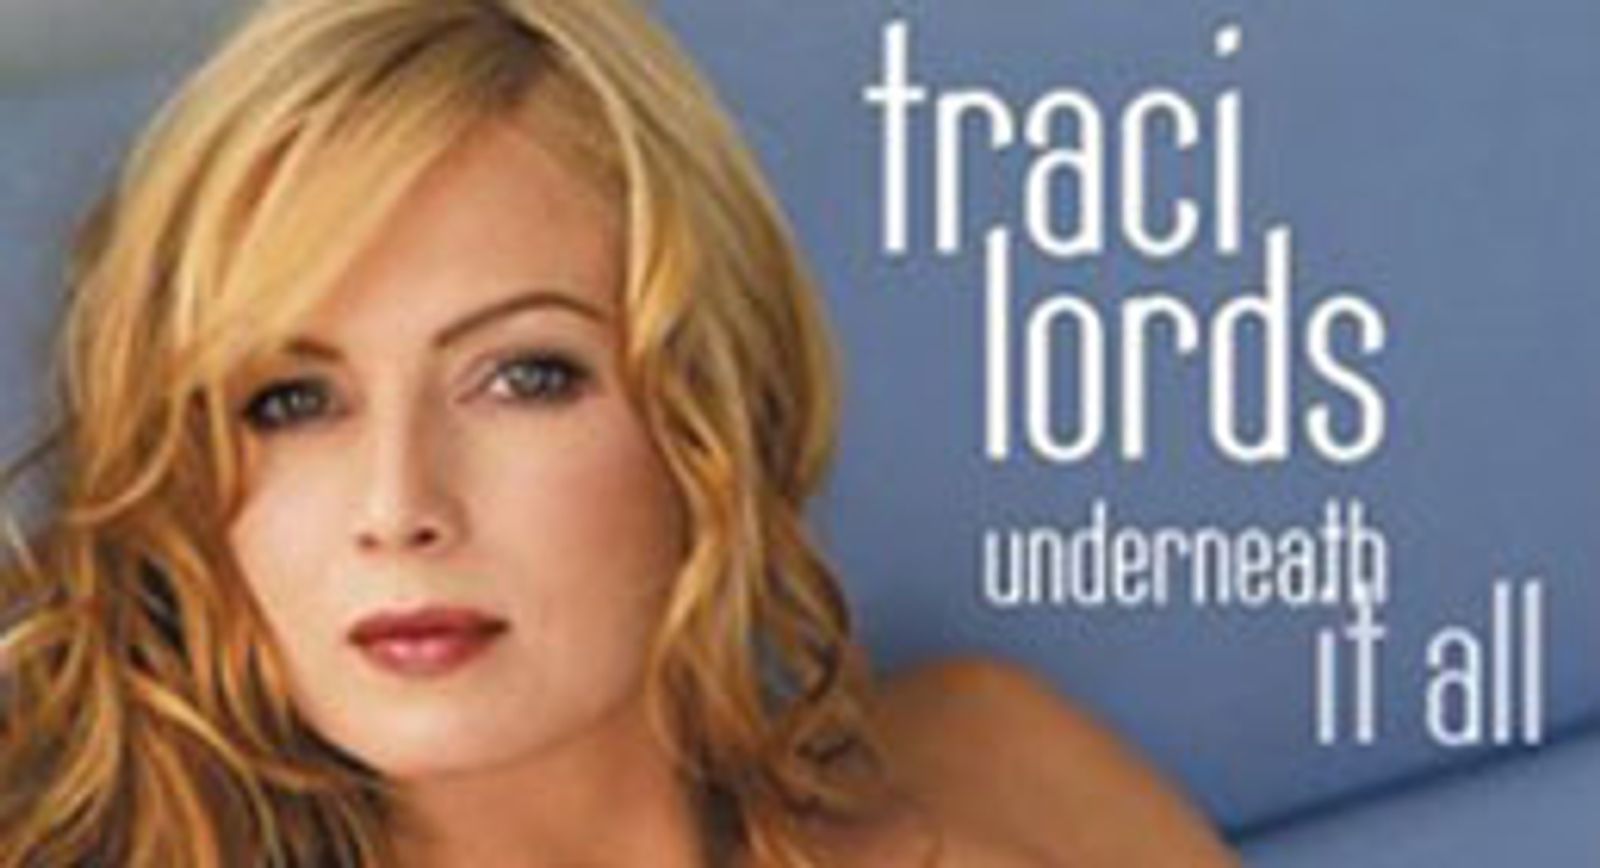 Voice From the Past: Transcript of Rare Traci Lords Interview